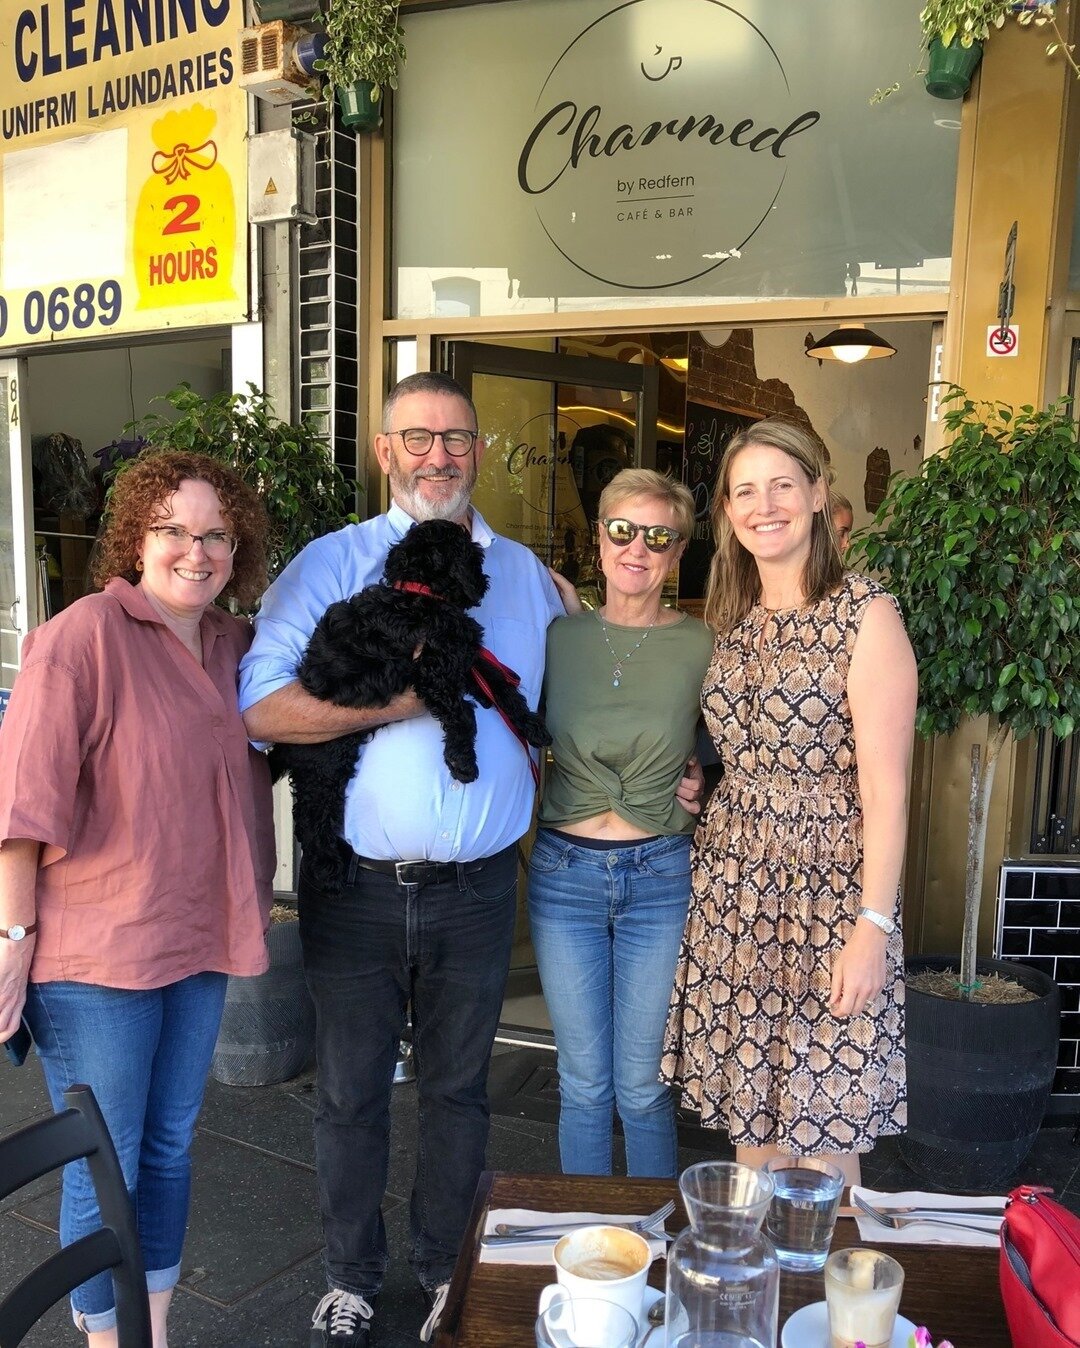 Charmed by Redfern owners, Peter and Cathy, welcome the newest member of the team: Murphy! 🐶⠀⠀⠀⠀⠀⠀⠀⠀⠀
Murphy is a hard worker, except when he needs a nap. He's very food-motivated, so we think he's a foodie. We try to keep him away from the coffee t